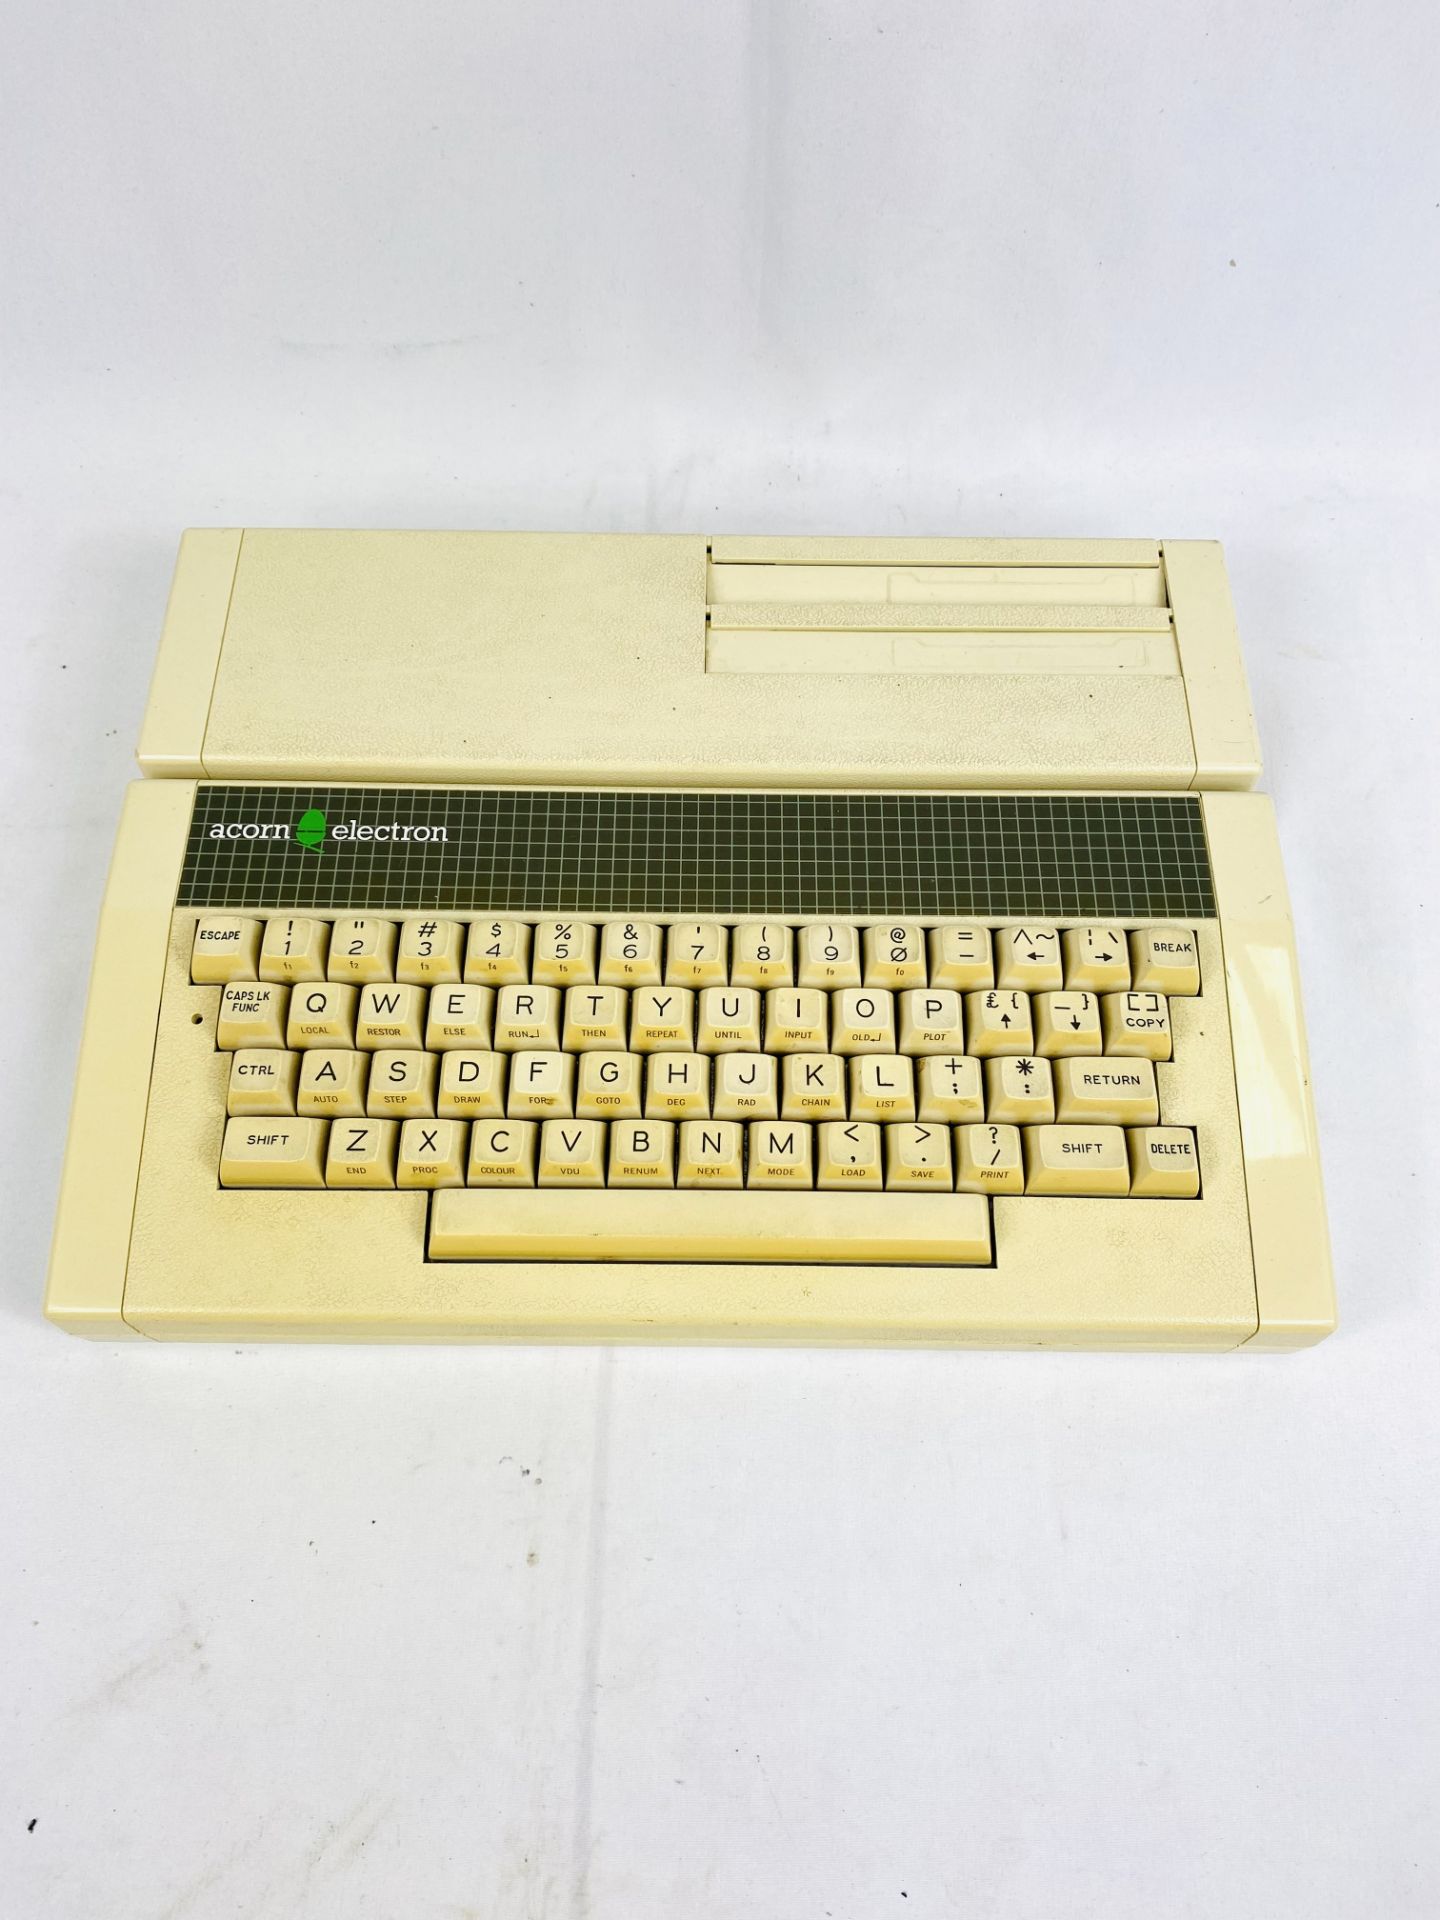 Acorn electronic computer and games